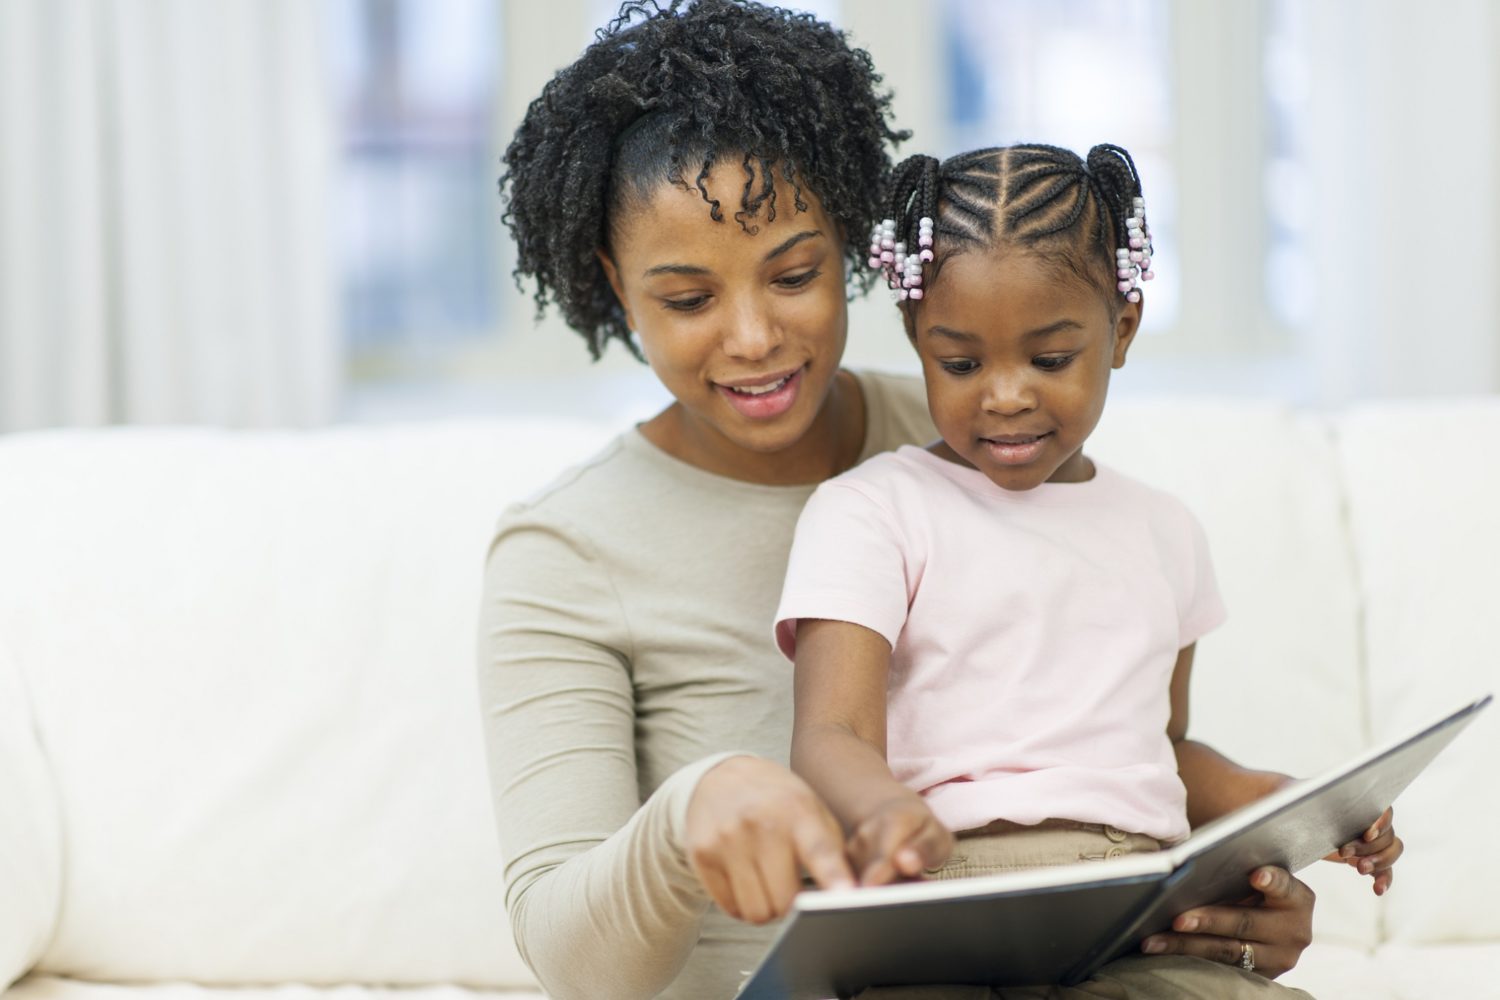 Closing The Gap In Reading Readiness For America’s Preschoolers